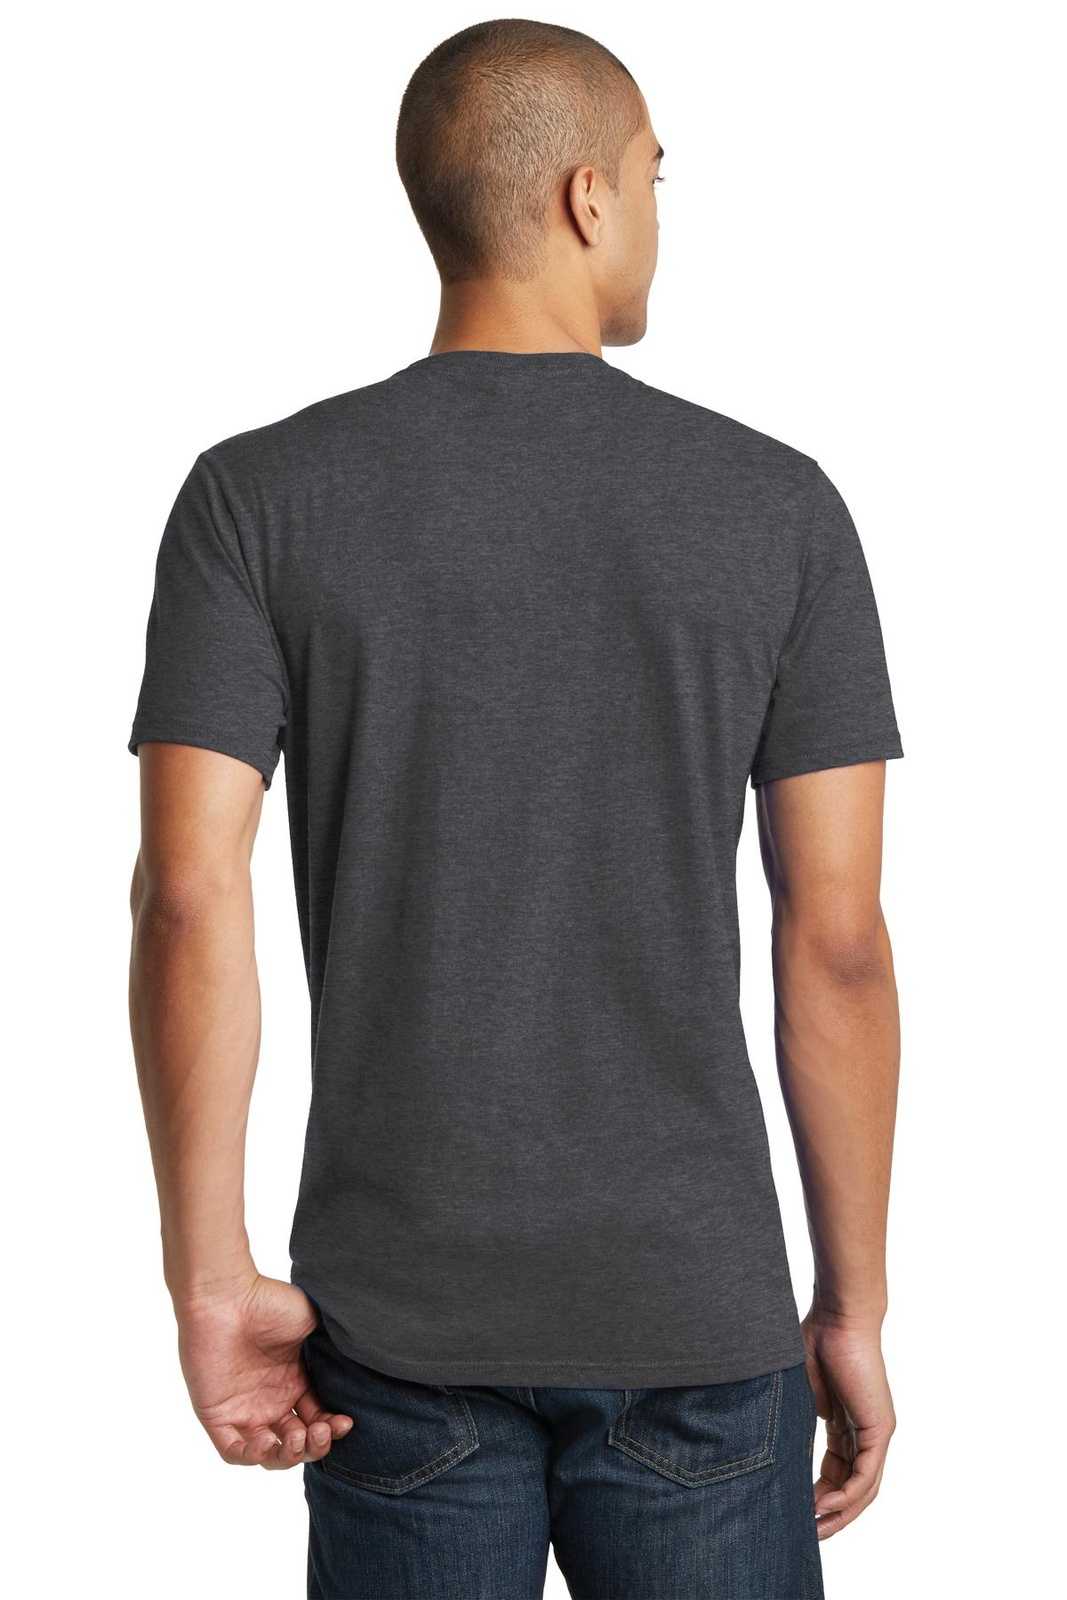 District DT5000 The Concert Tee - Heathered Charcoal - HIT a Double - 1